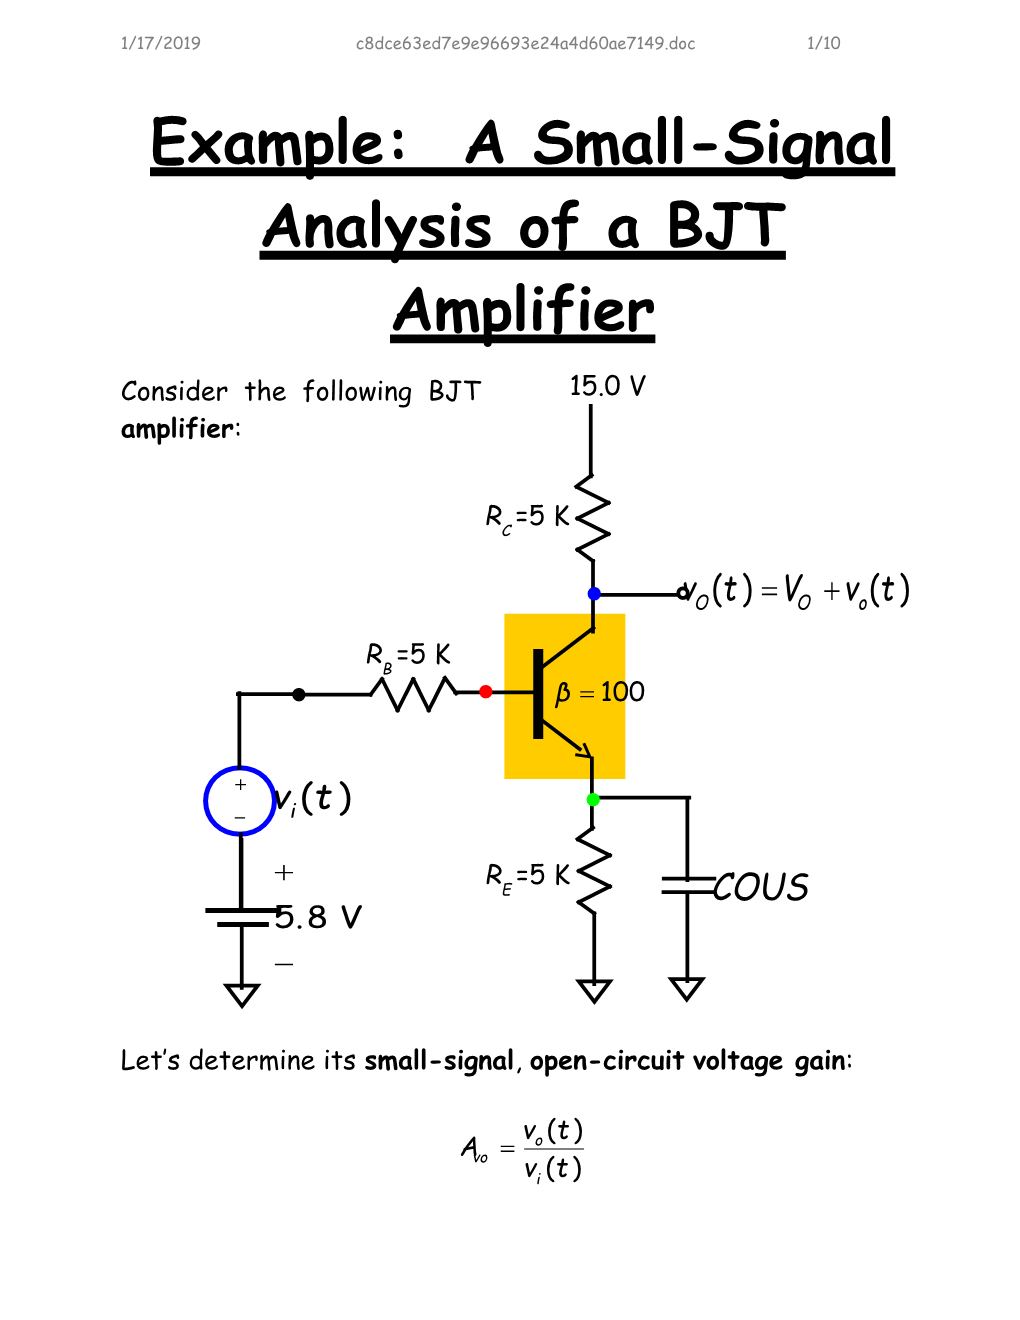 Example: a Small-Signal Analysis of a BJT Amplifier